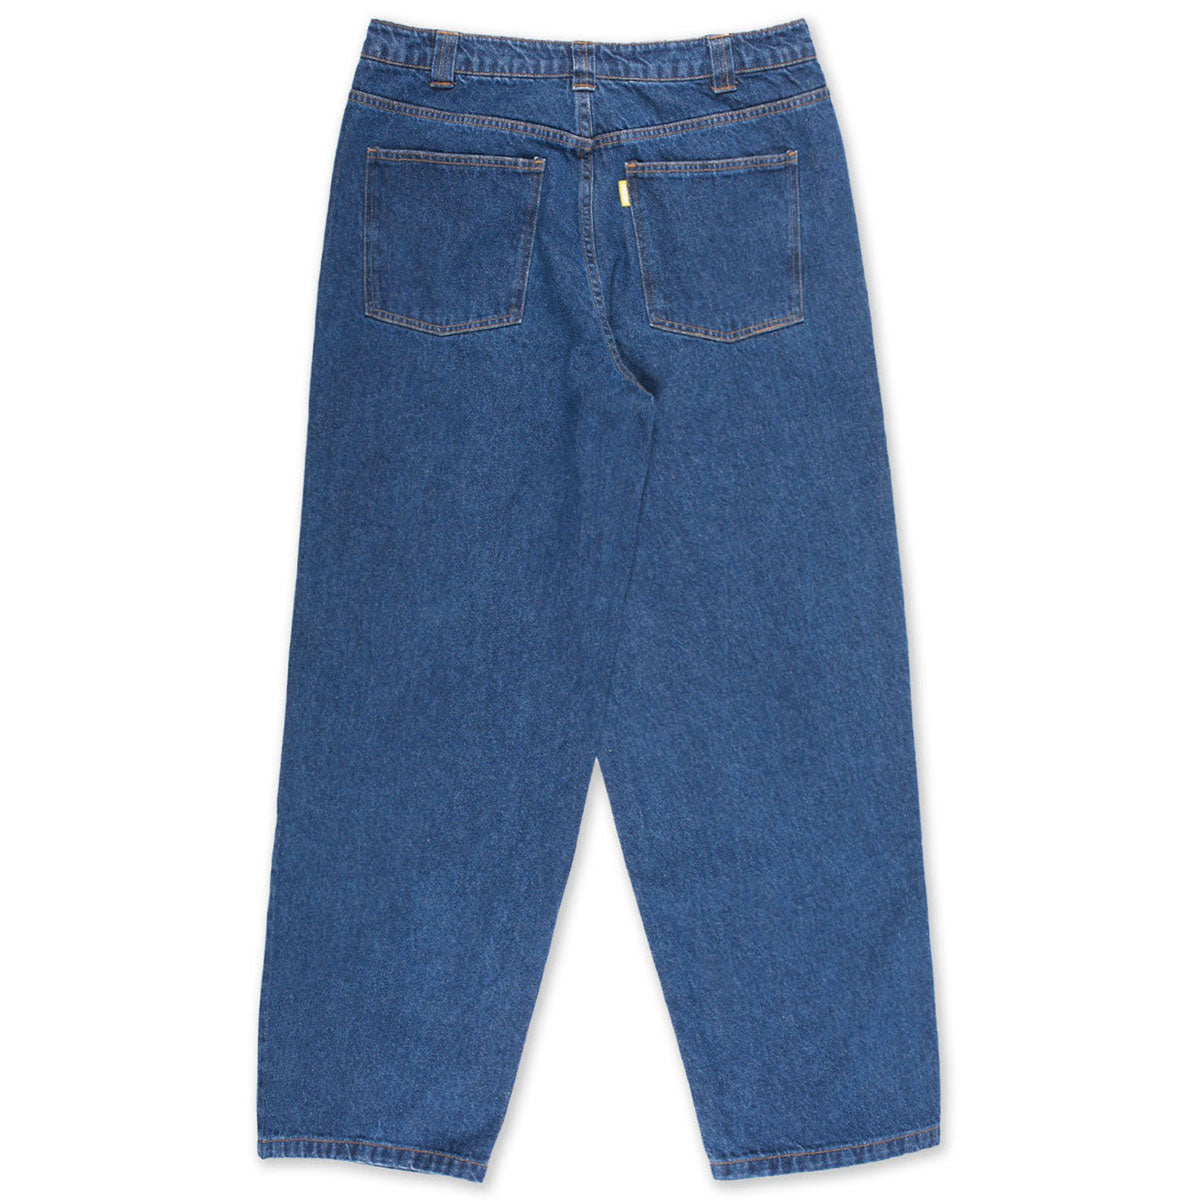 Theories Plaza Jeans - Washed Blue image 2